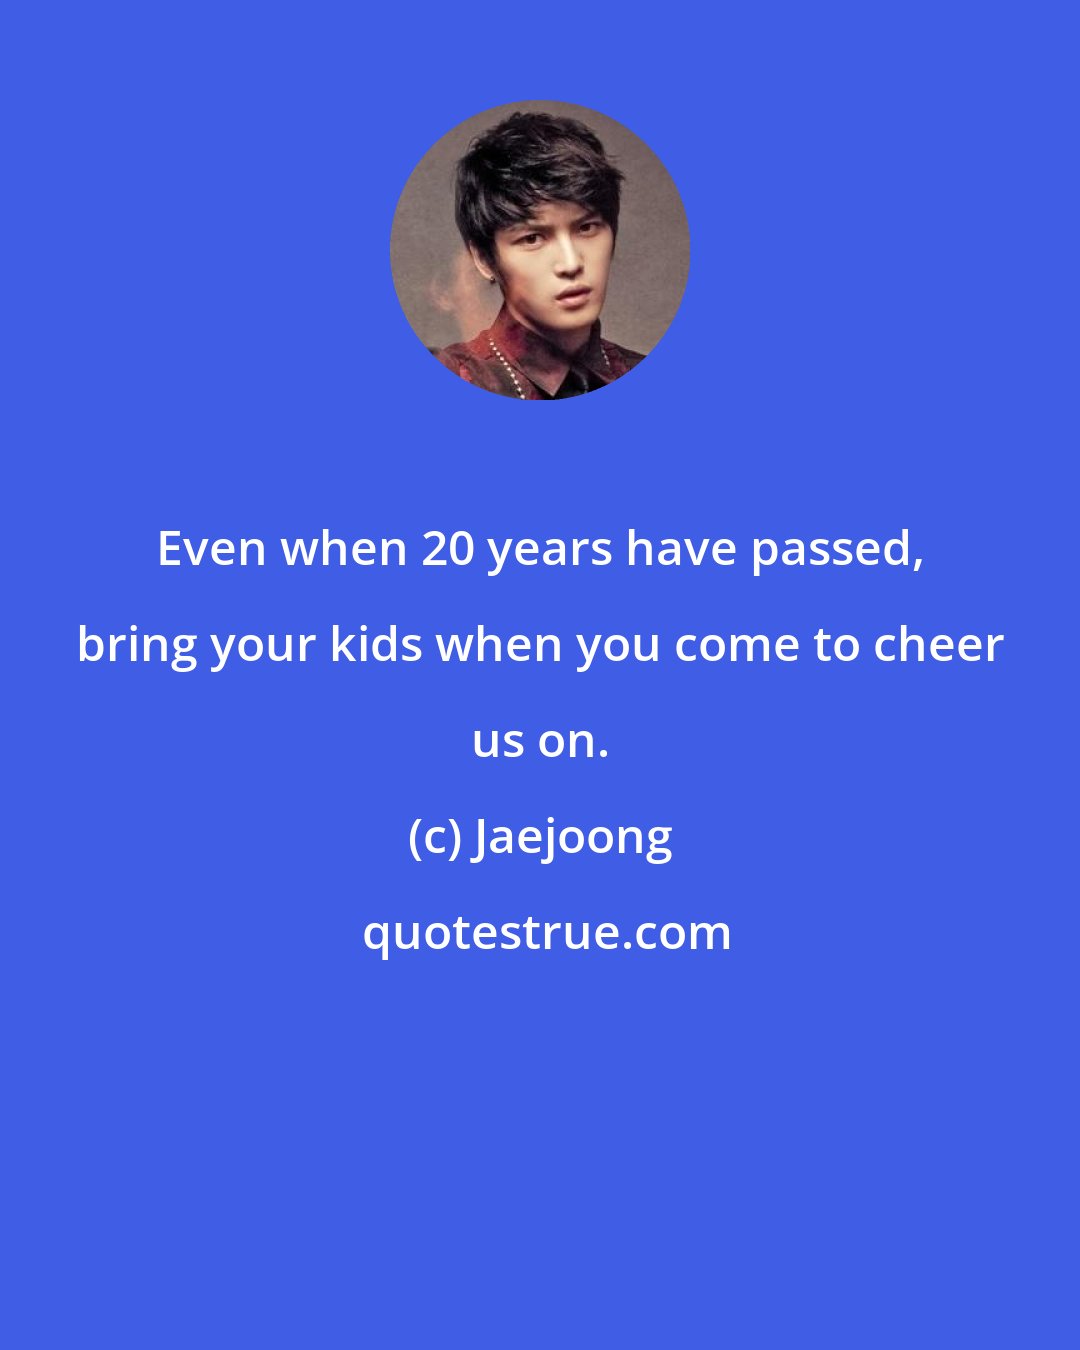 Jaejoong: Even when 20 years have passed, bring your kids when you come to cheer us on.